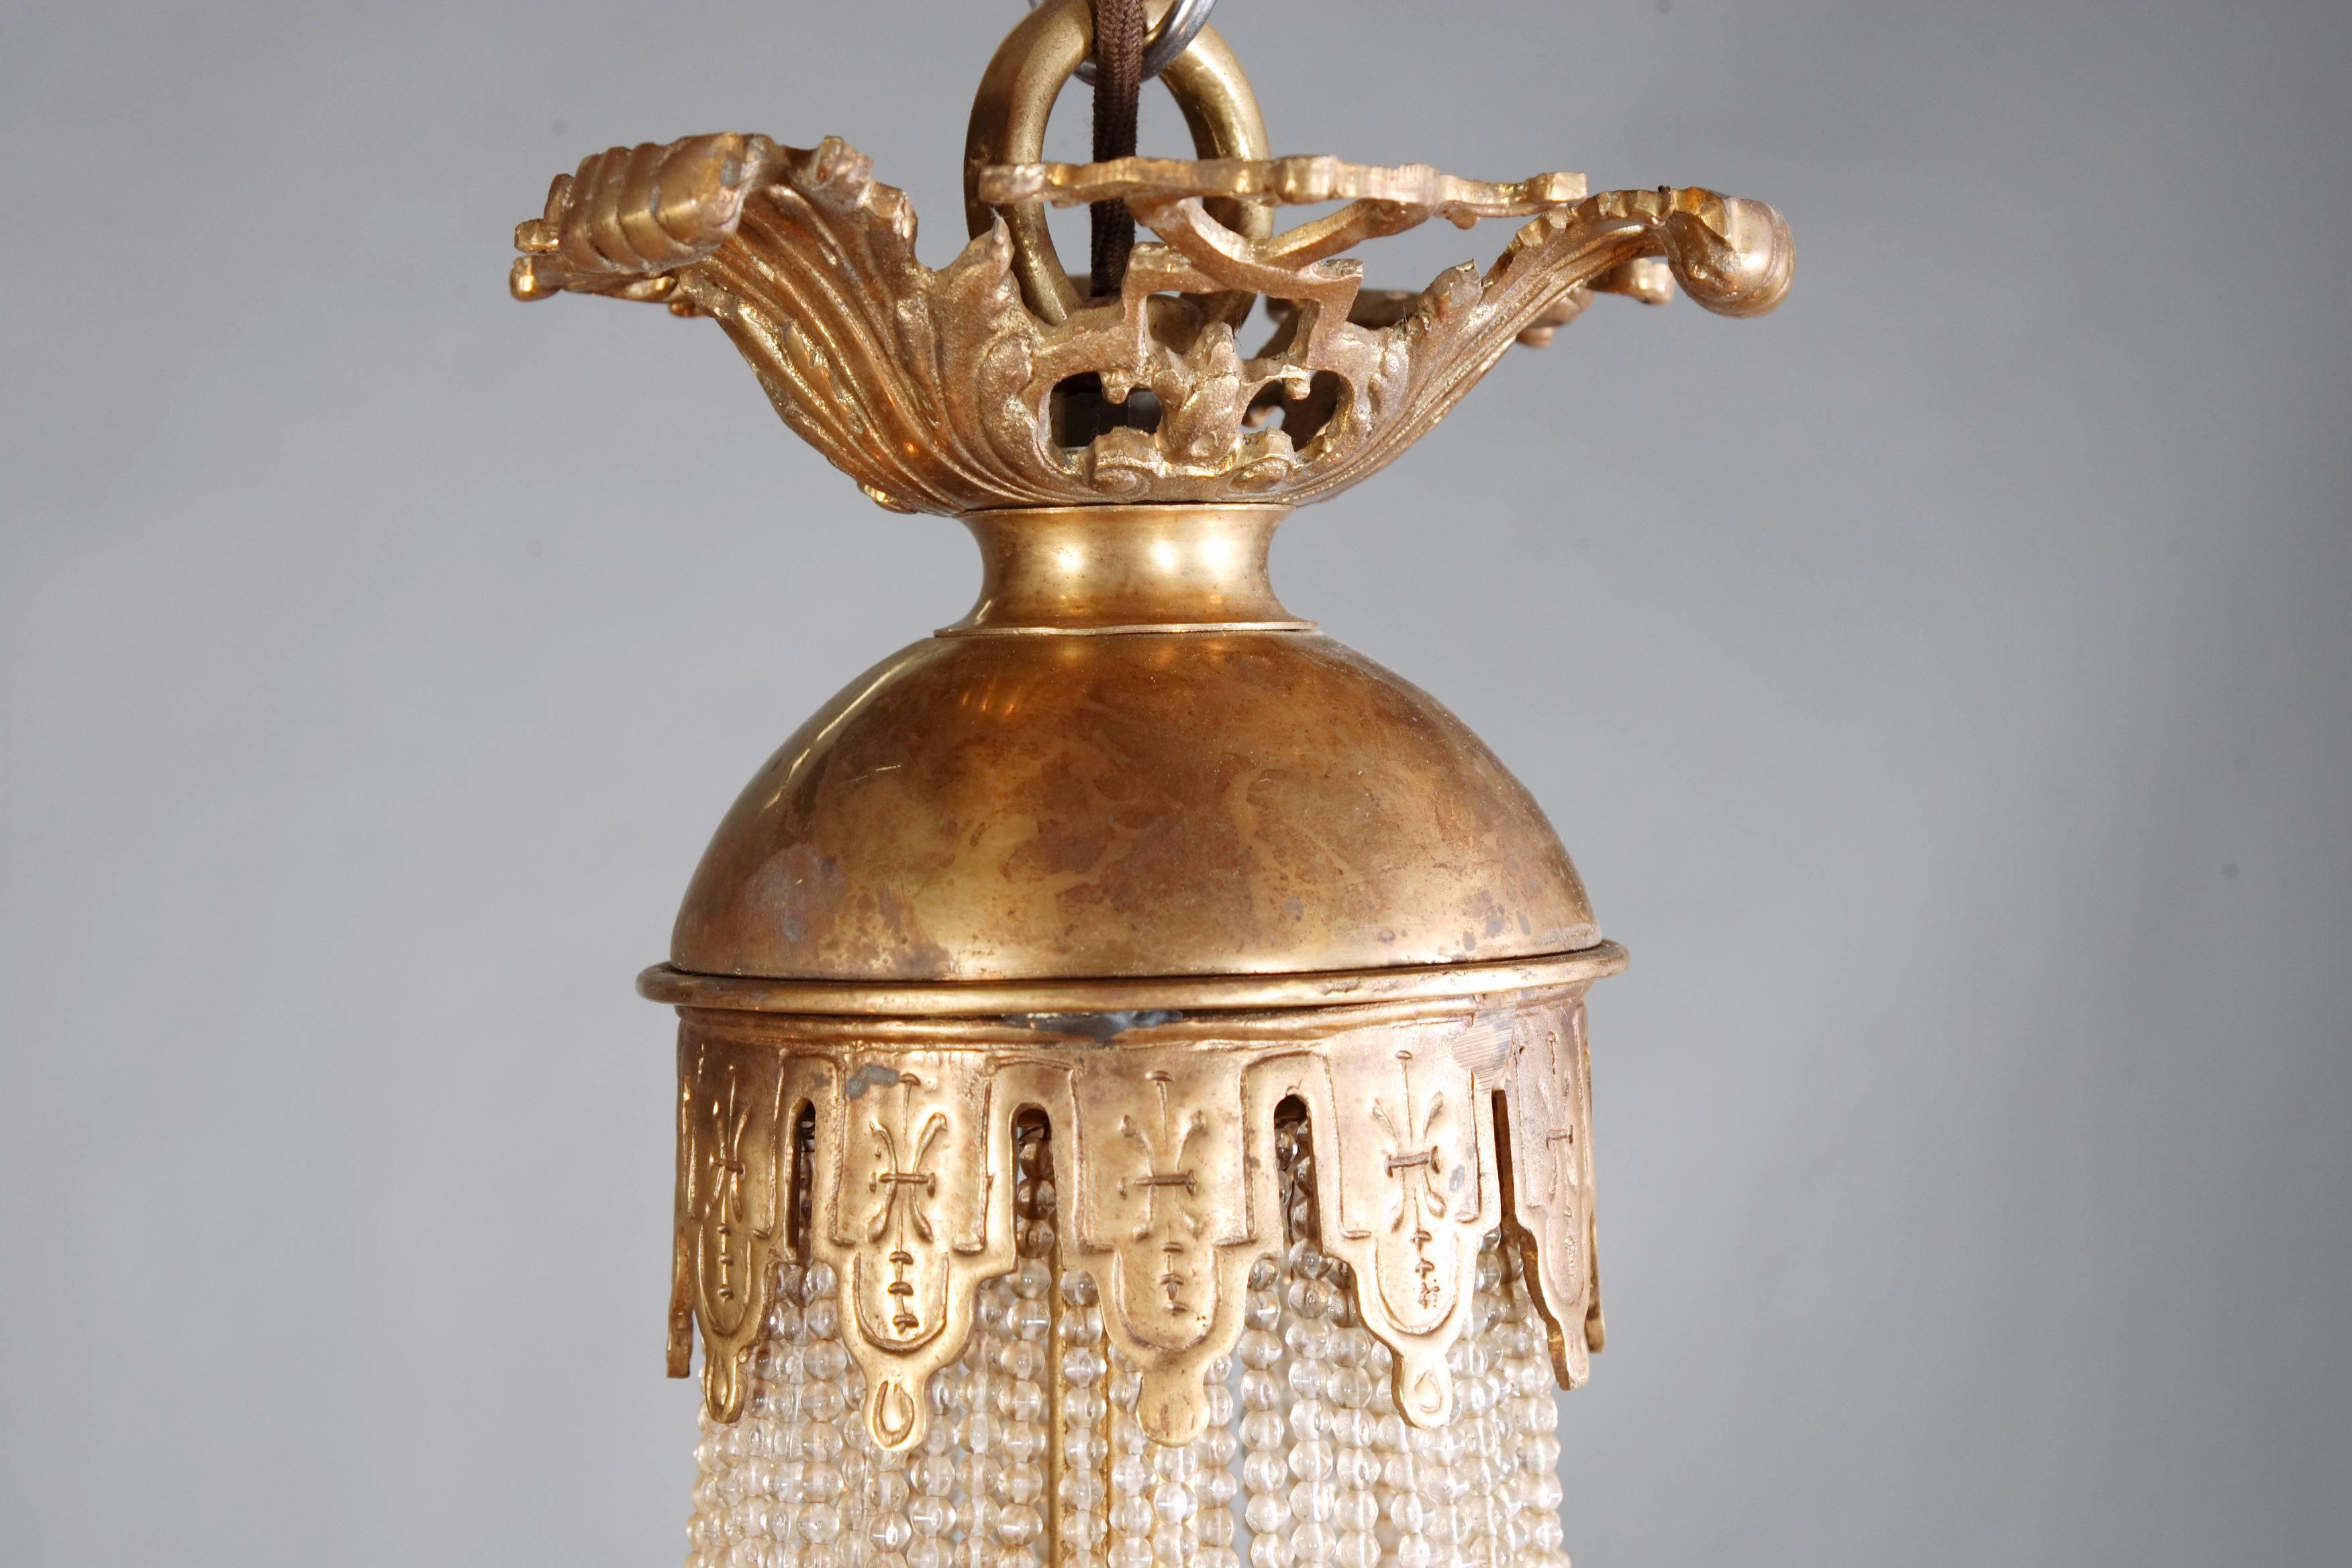 Majestic splendid chandelier in Empire style referred to Empress Joséphine. Exceptionally cine, engraved and cast bronze. Basket-formed corpus from handcut Frenches ball prisms . Connected through wide, mythological ornamental reliefed and broken